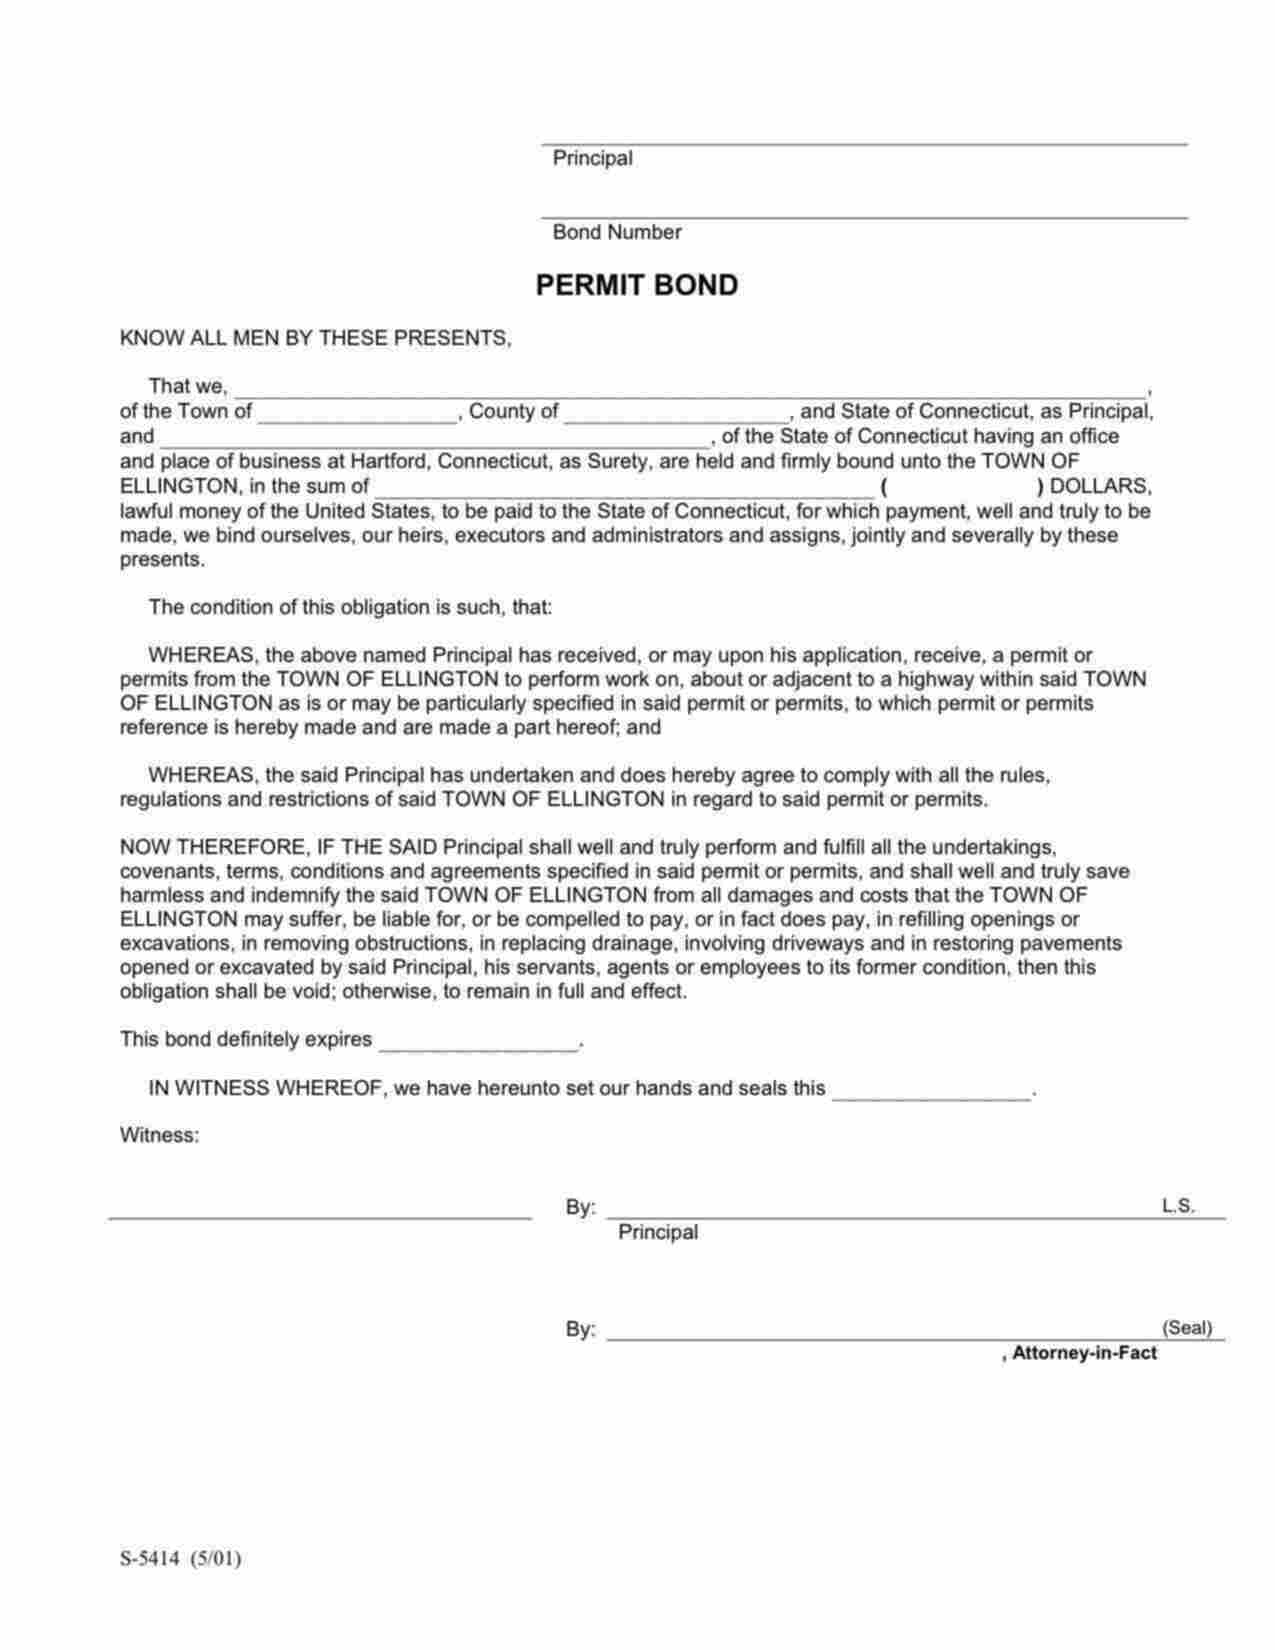 Connecticut Highway Right of Way Permit Bond Form